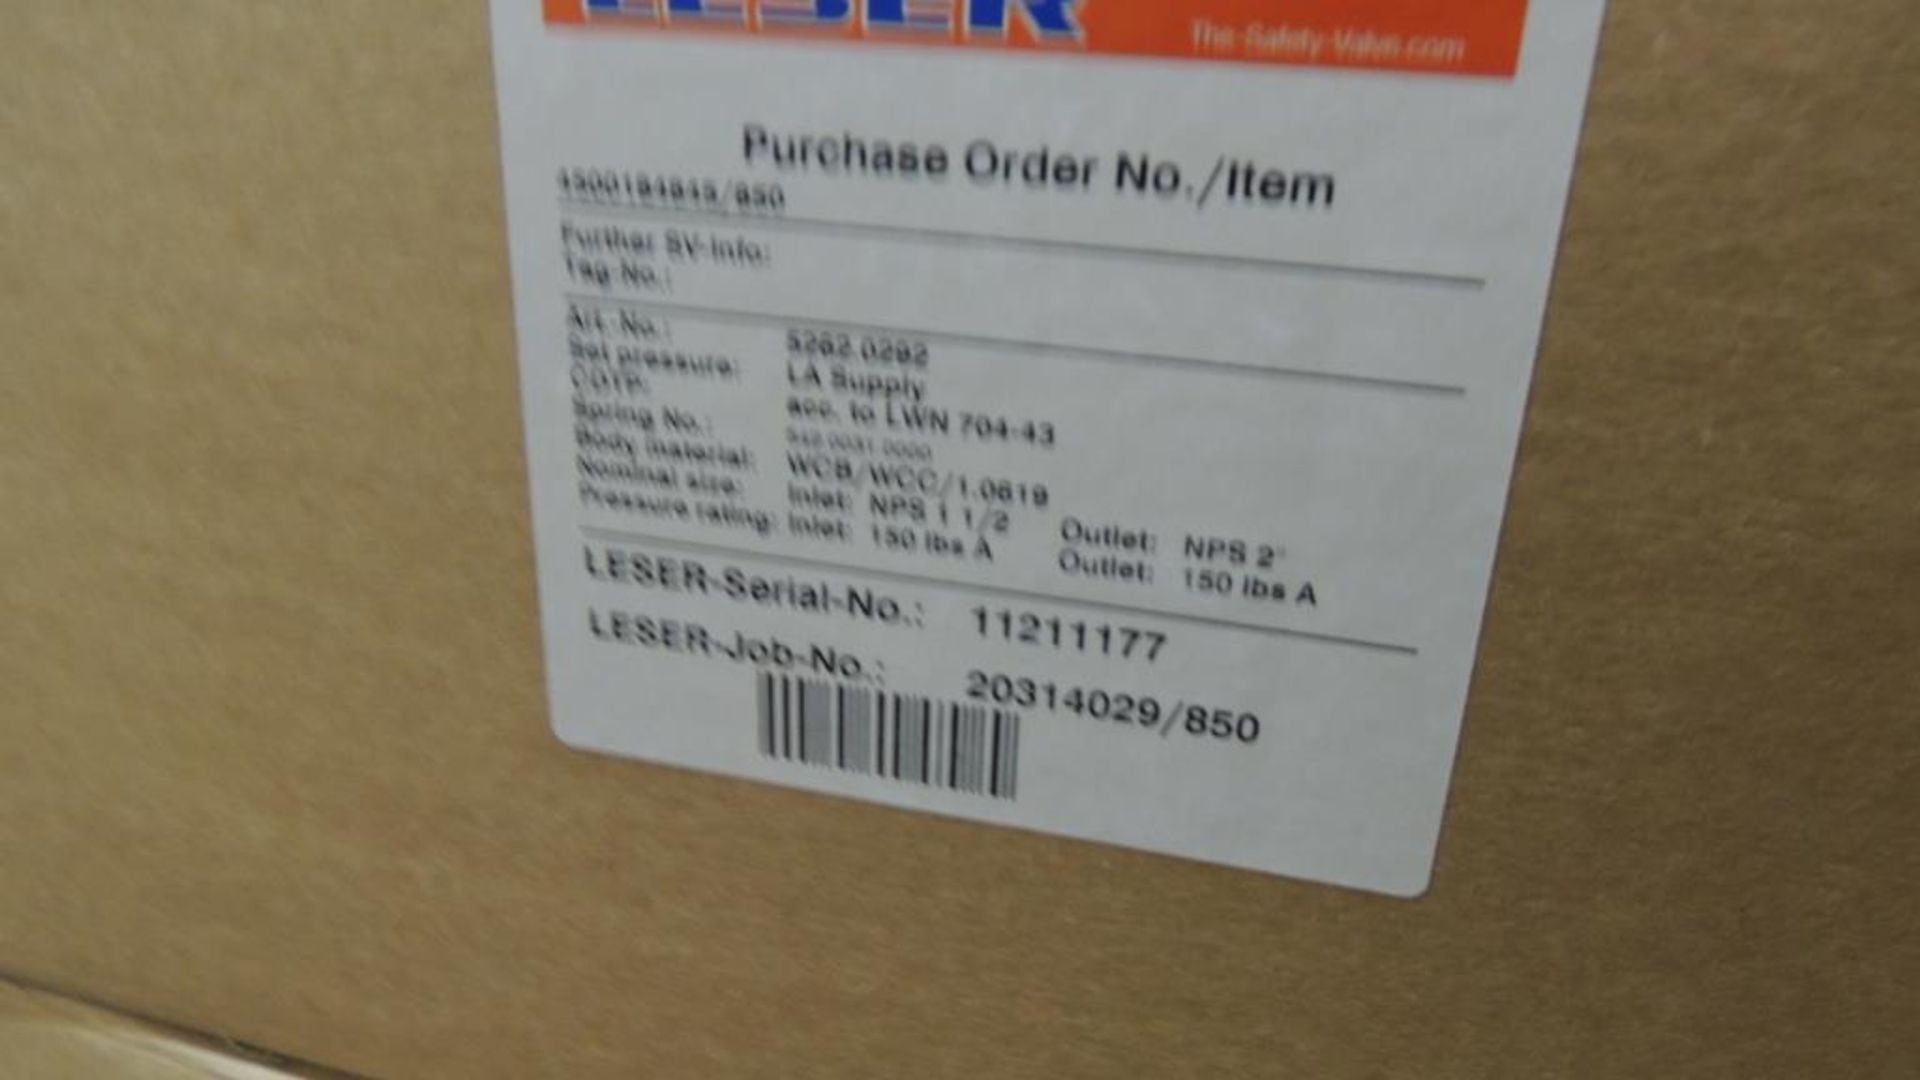 Large Quantity of Leser Relief and Safety Valves, plus Spare Parts Kits - Image 201 of 374